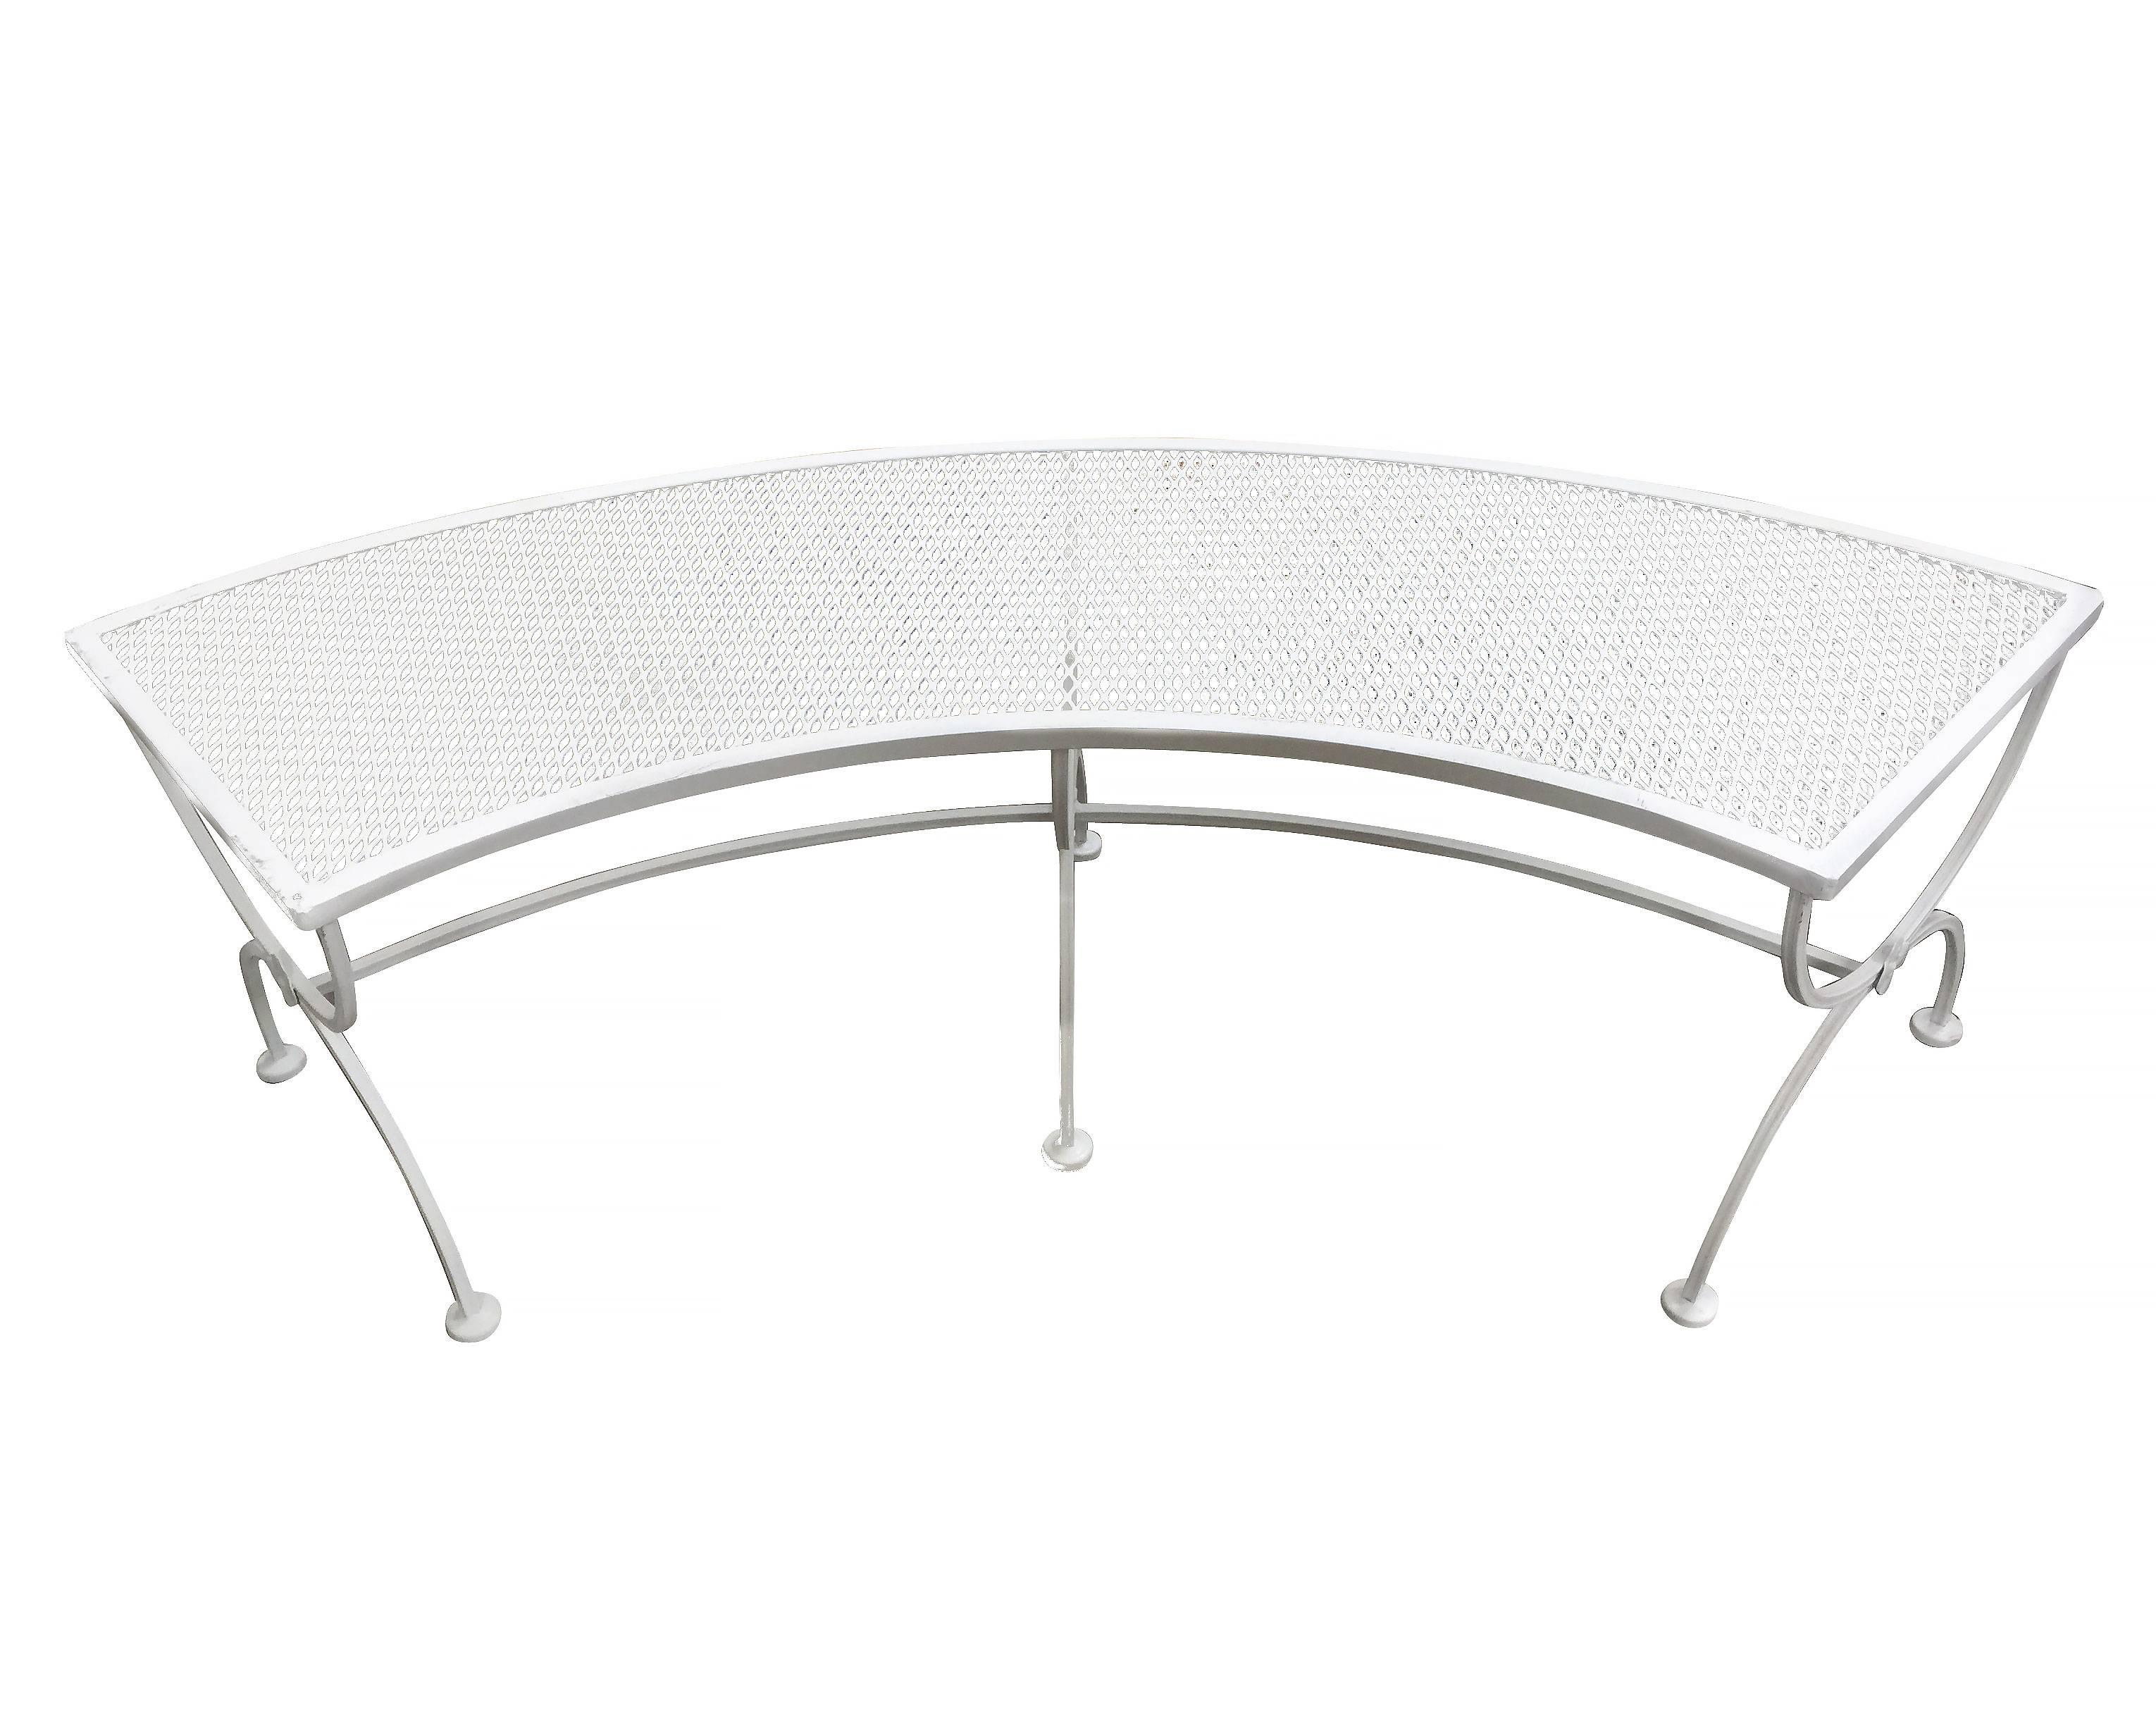 Russell Woodard quarter round mesh patio outdoor bench with mesh seat and a sculpted base.

One bench available.